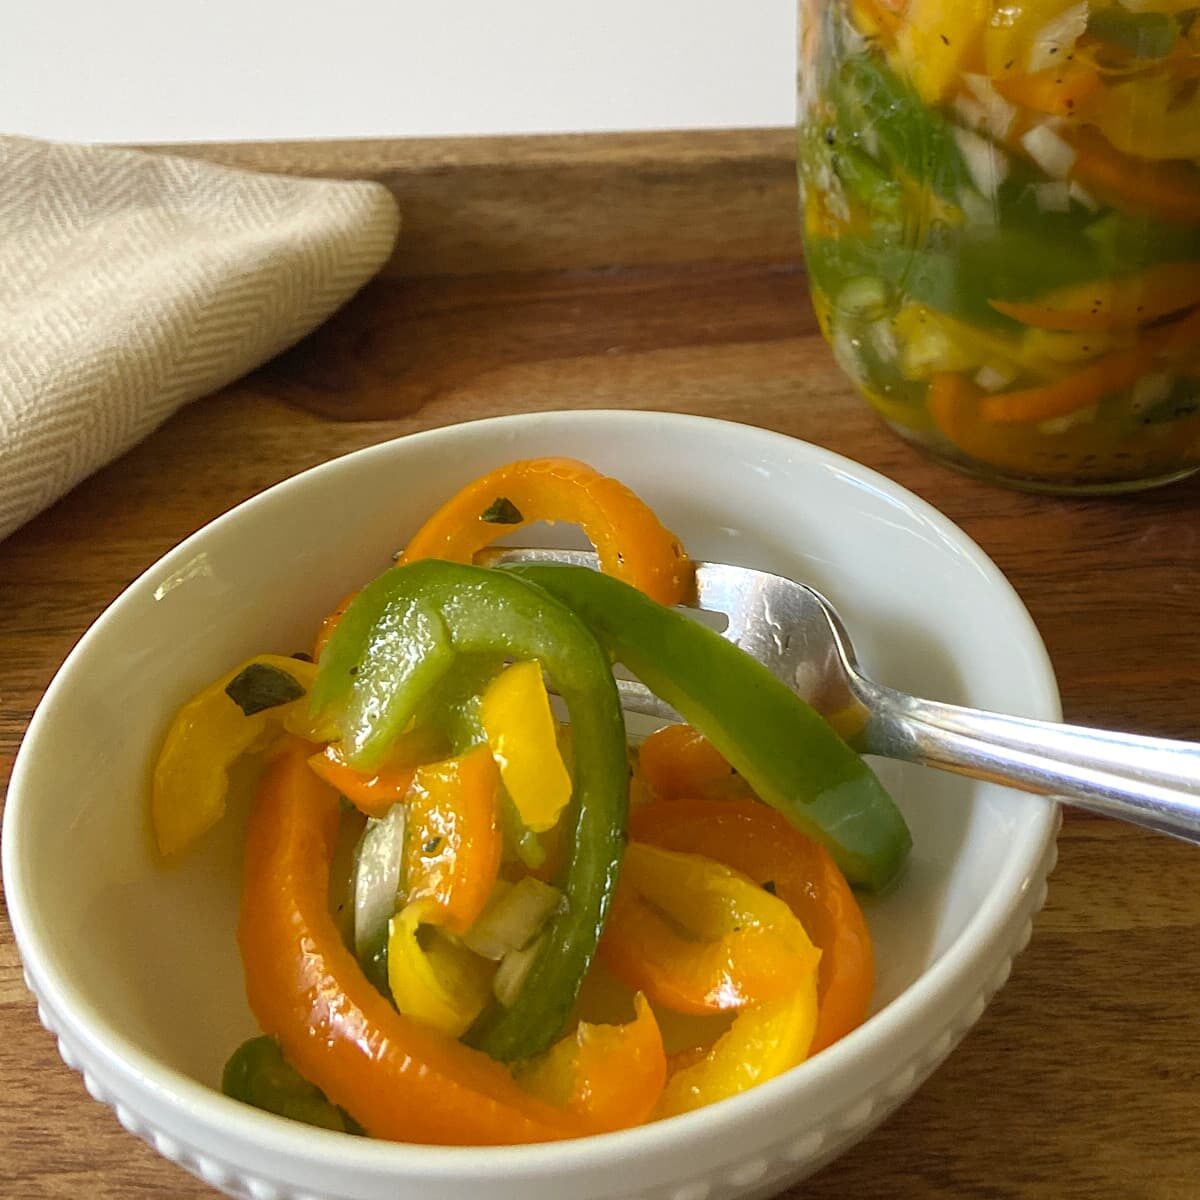 a serving of bell pepper salad in bowl